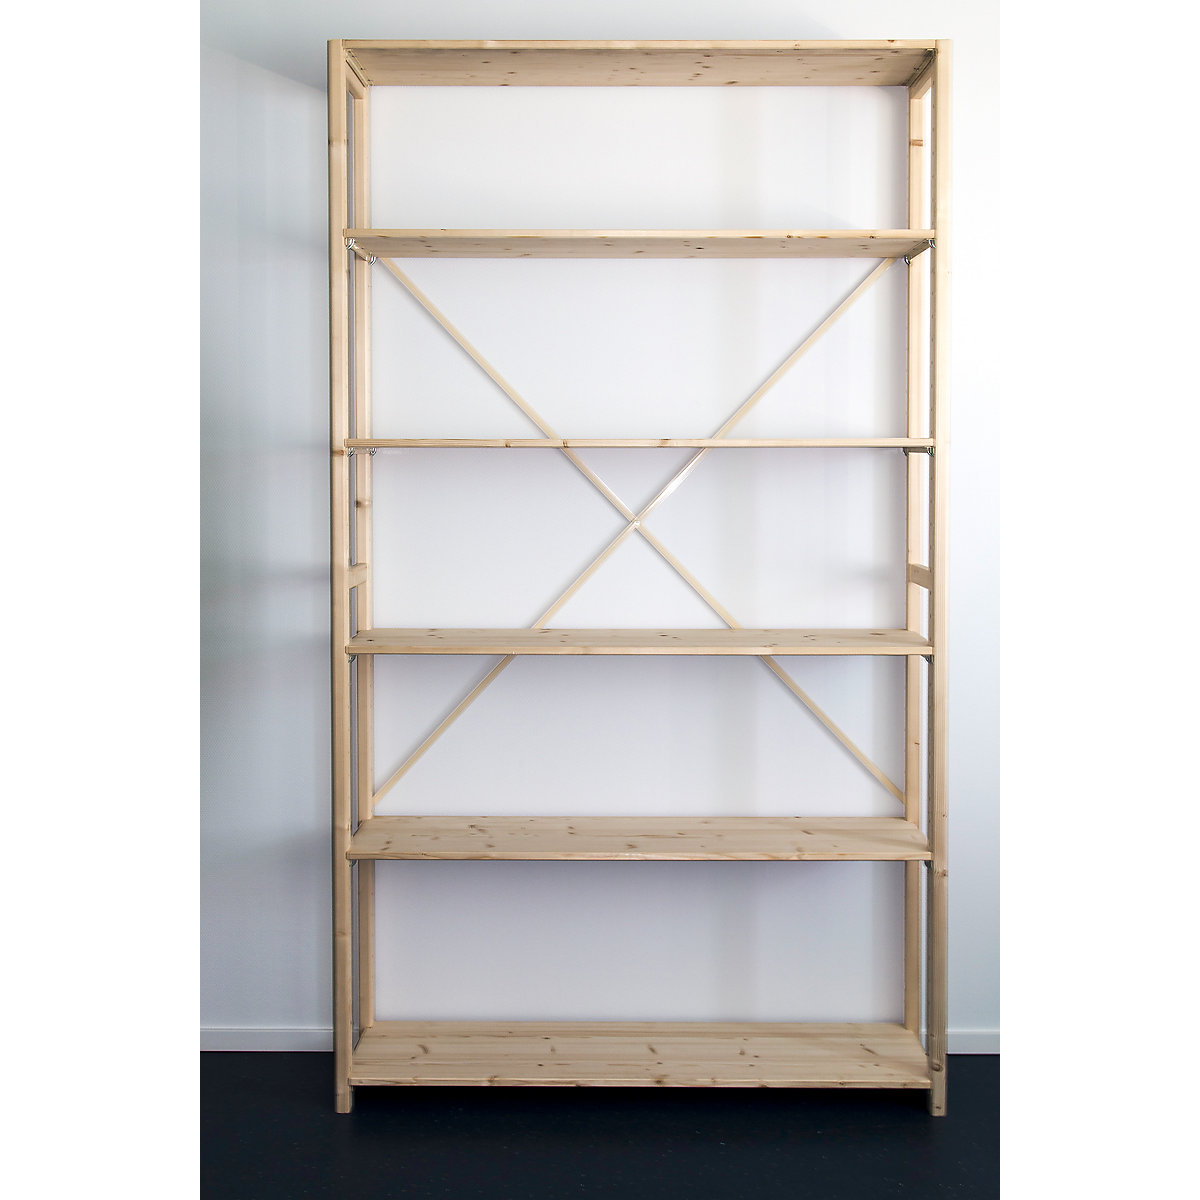 Solid Wood Boltless Shelving Unit, Bookcase Shelf Thickness